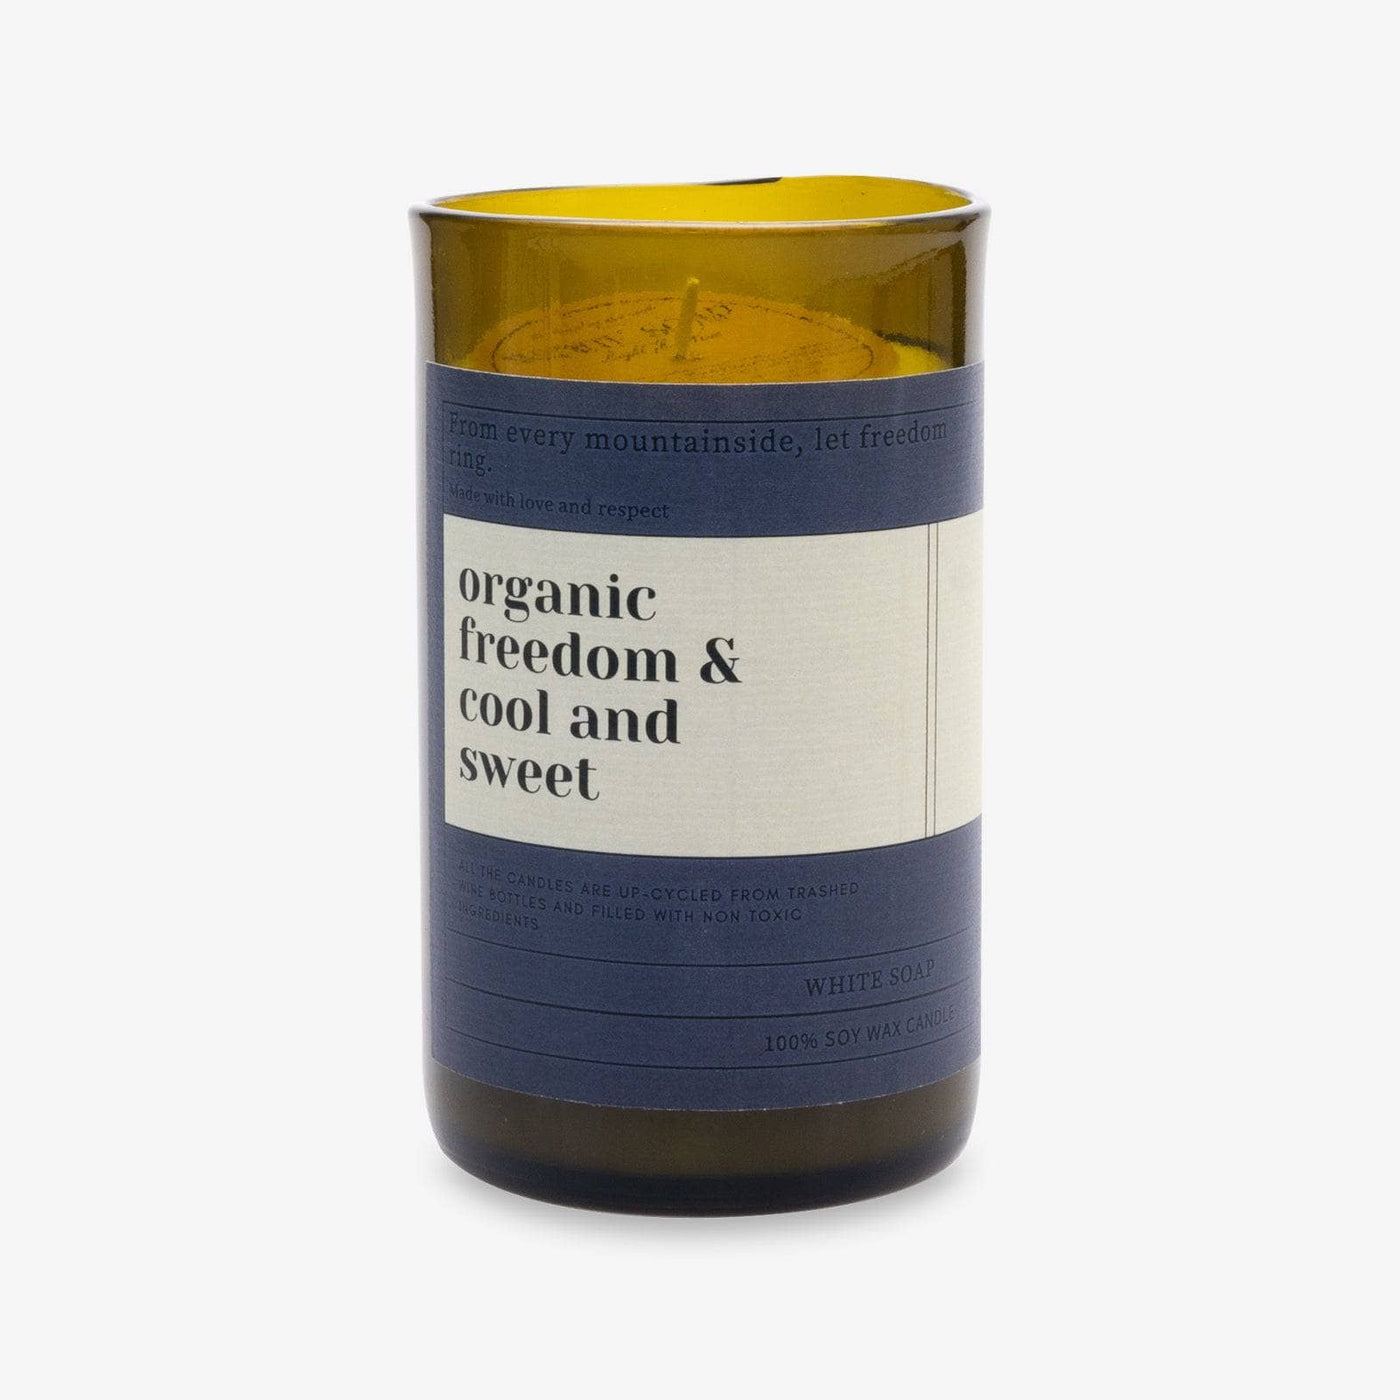 Organic Freedom Soy Wax Candle, Amber, 500 g - 1